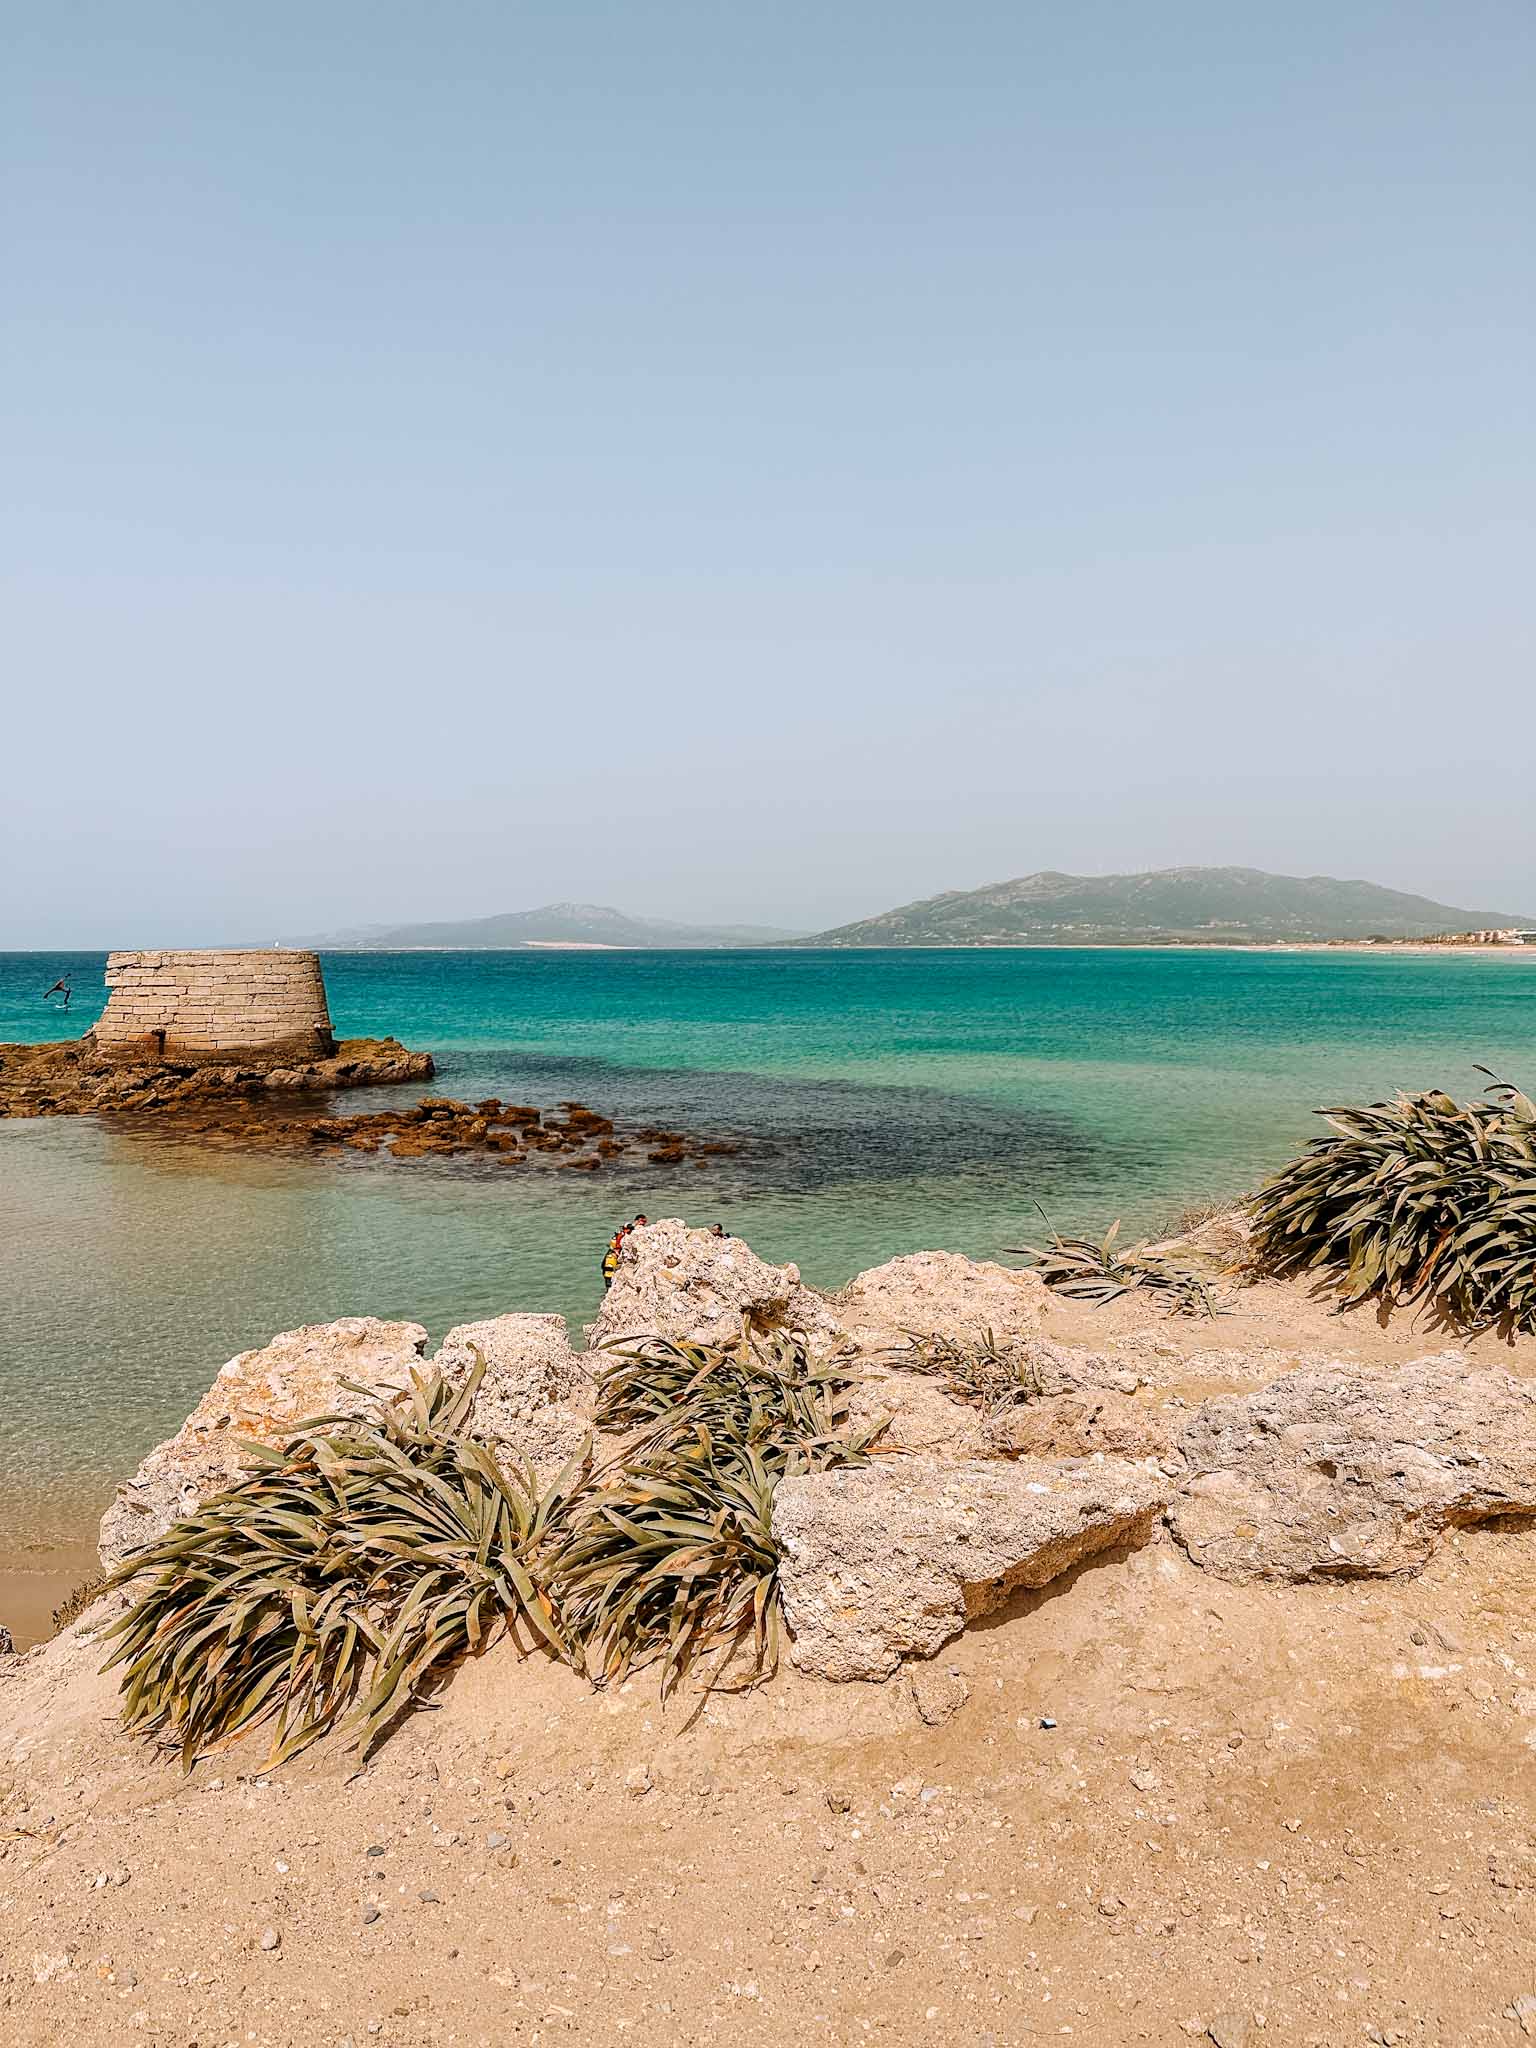 Best Instagram spots and best things to do in Tarifa, Spain